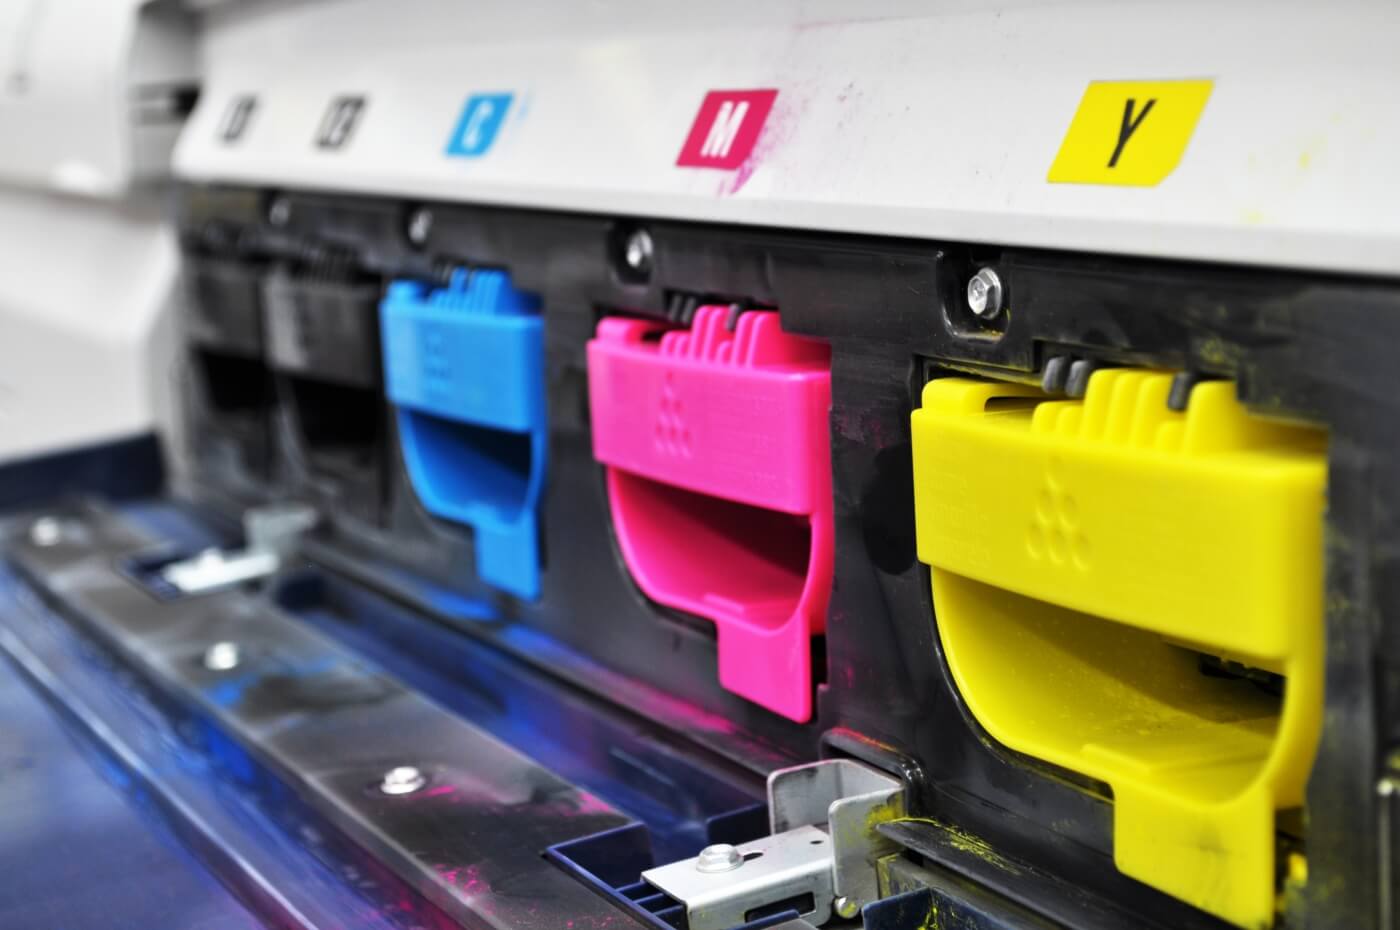 HP keeps updating its printers to block third-party ink cartridges